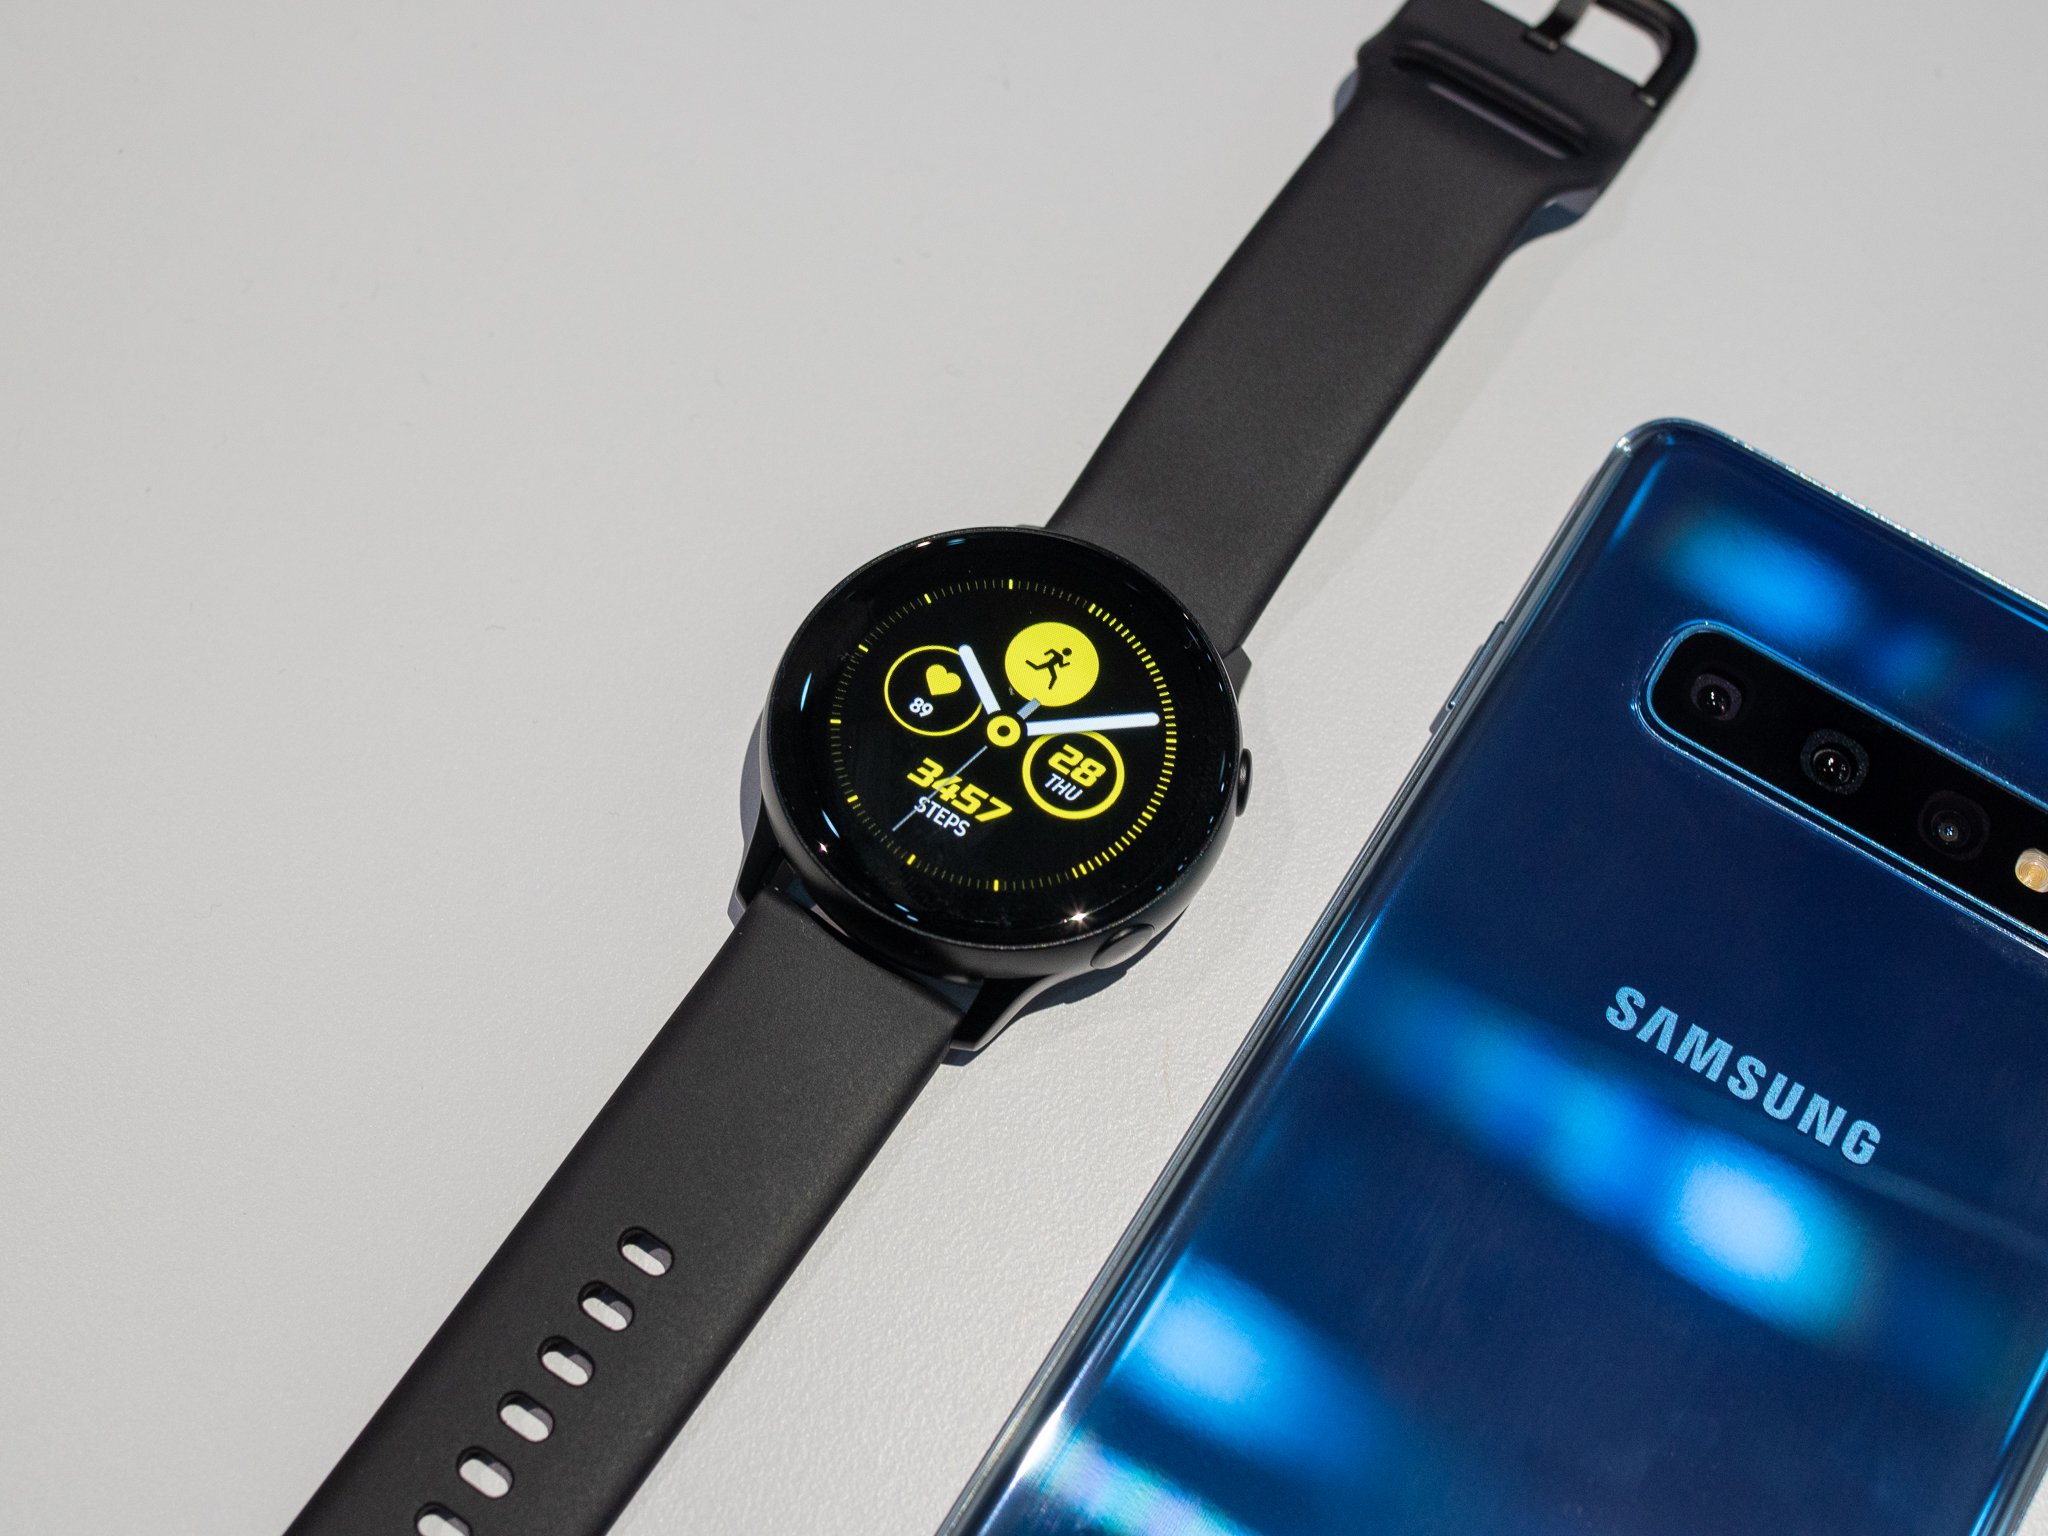 Where to get a replacement charger for Samsung Galaxy Watch Active